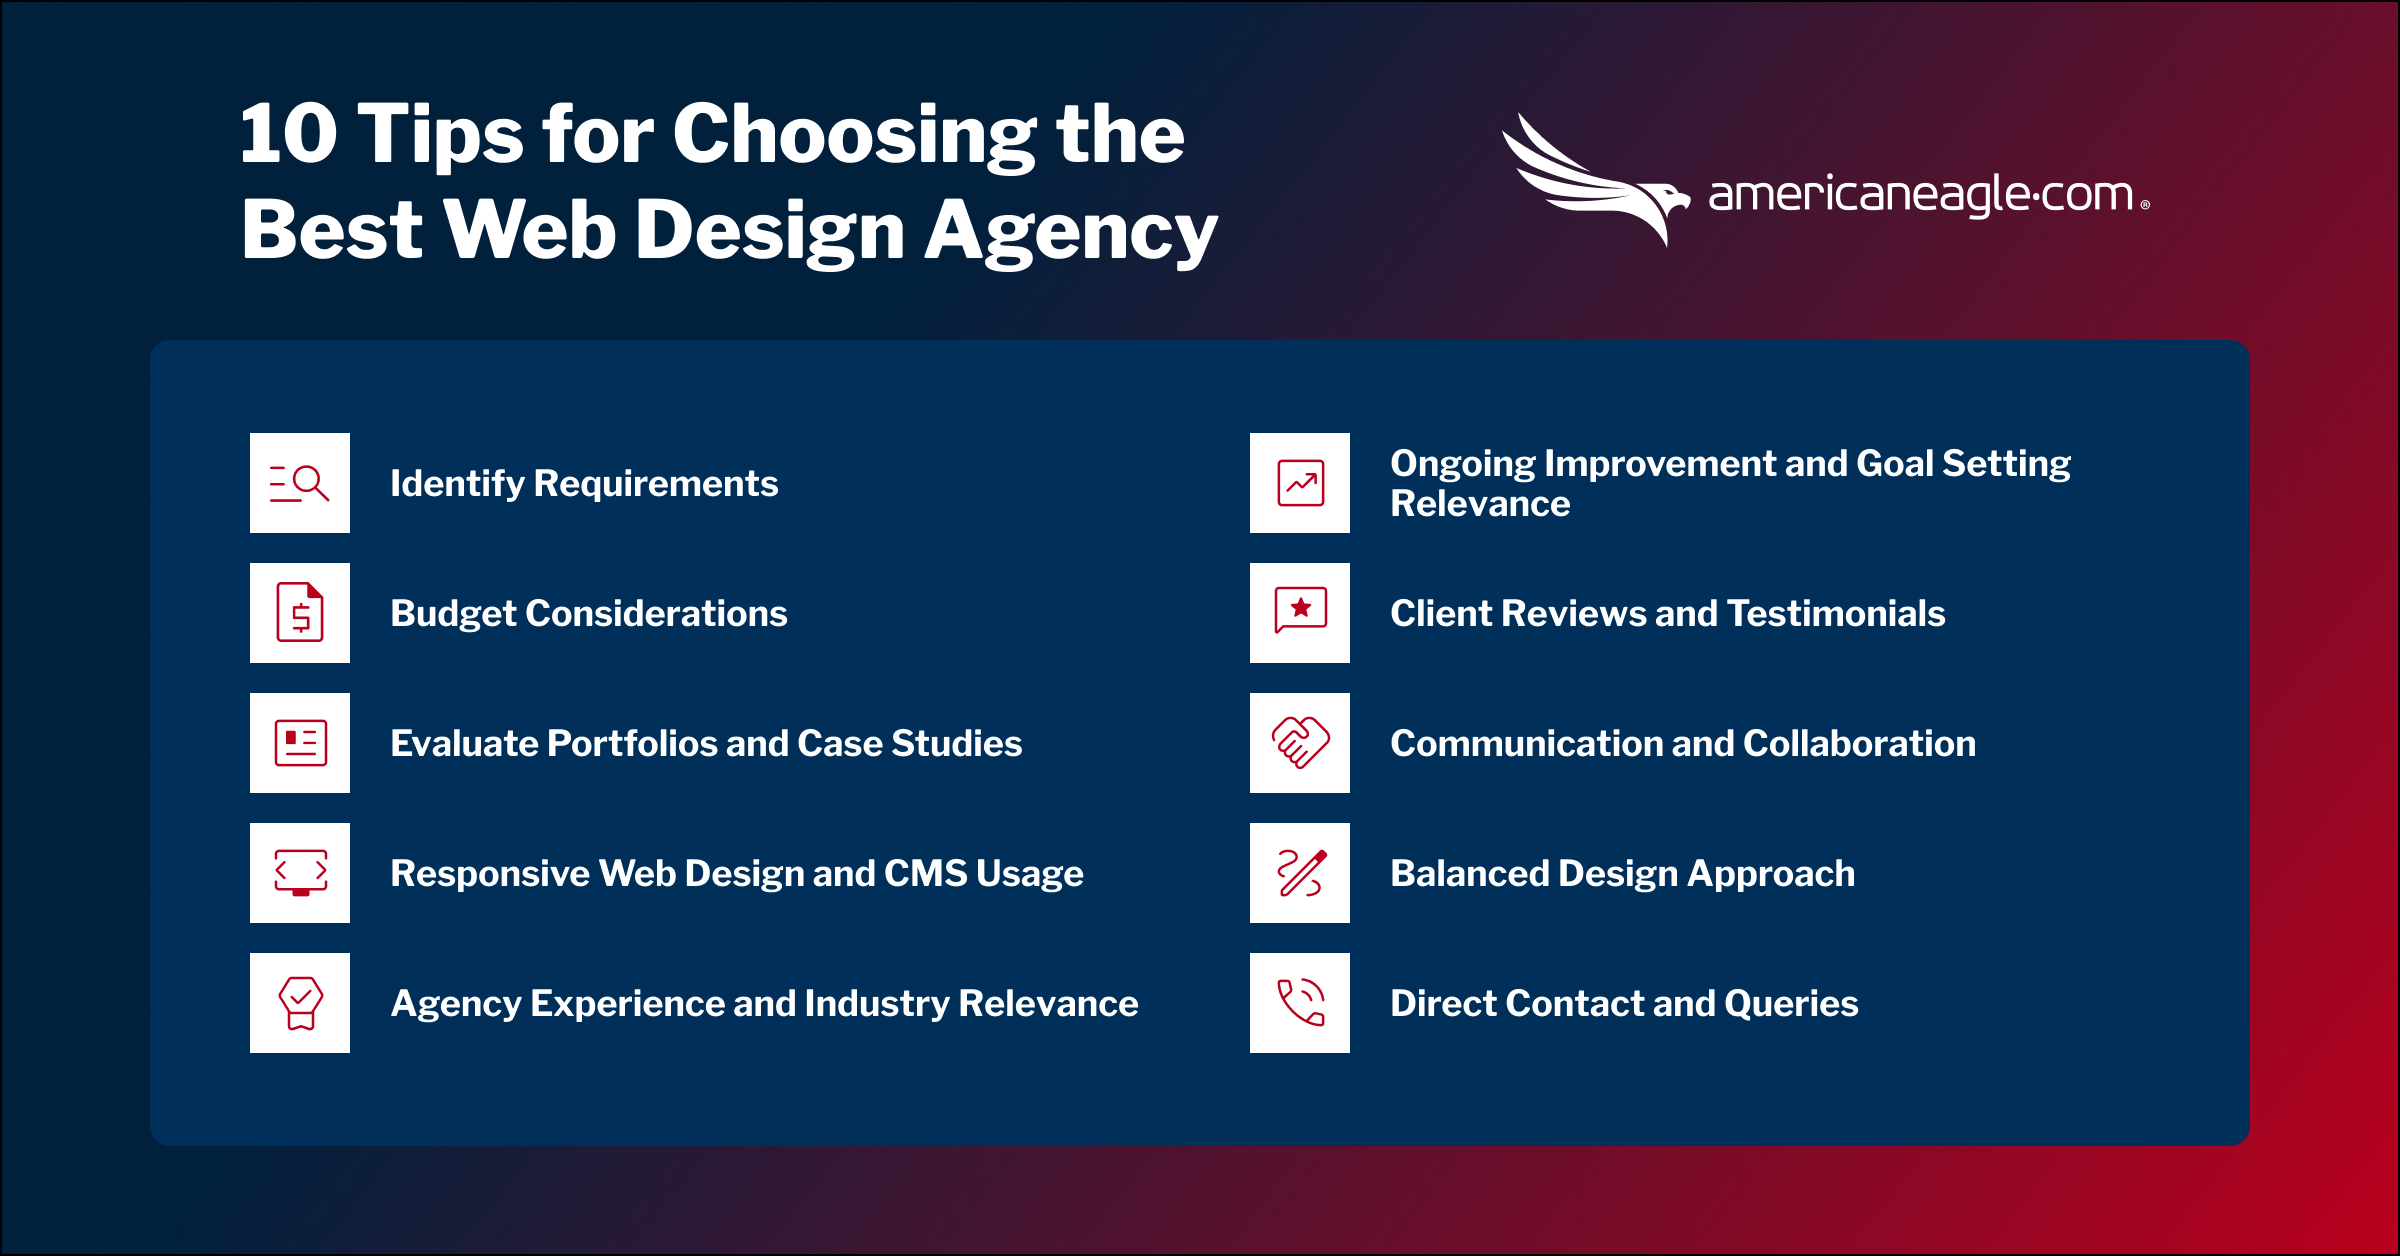 Infographic listing top 10 tips for selecting the best web design agency, including budget and portfolio considerations.